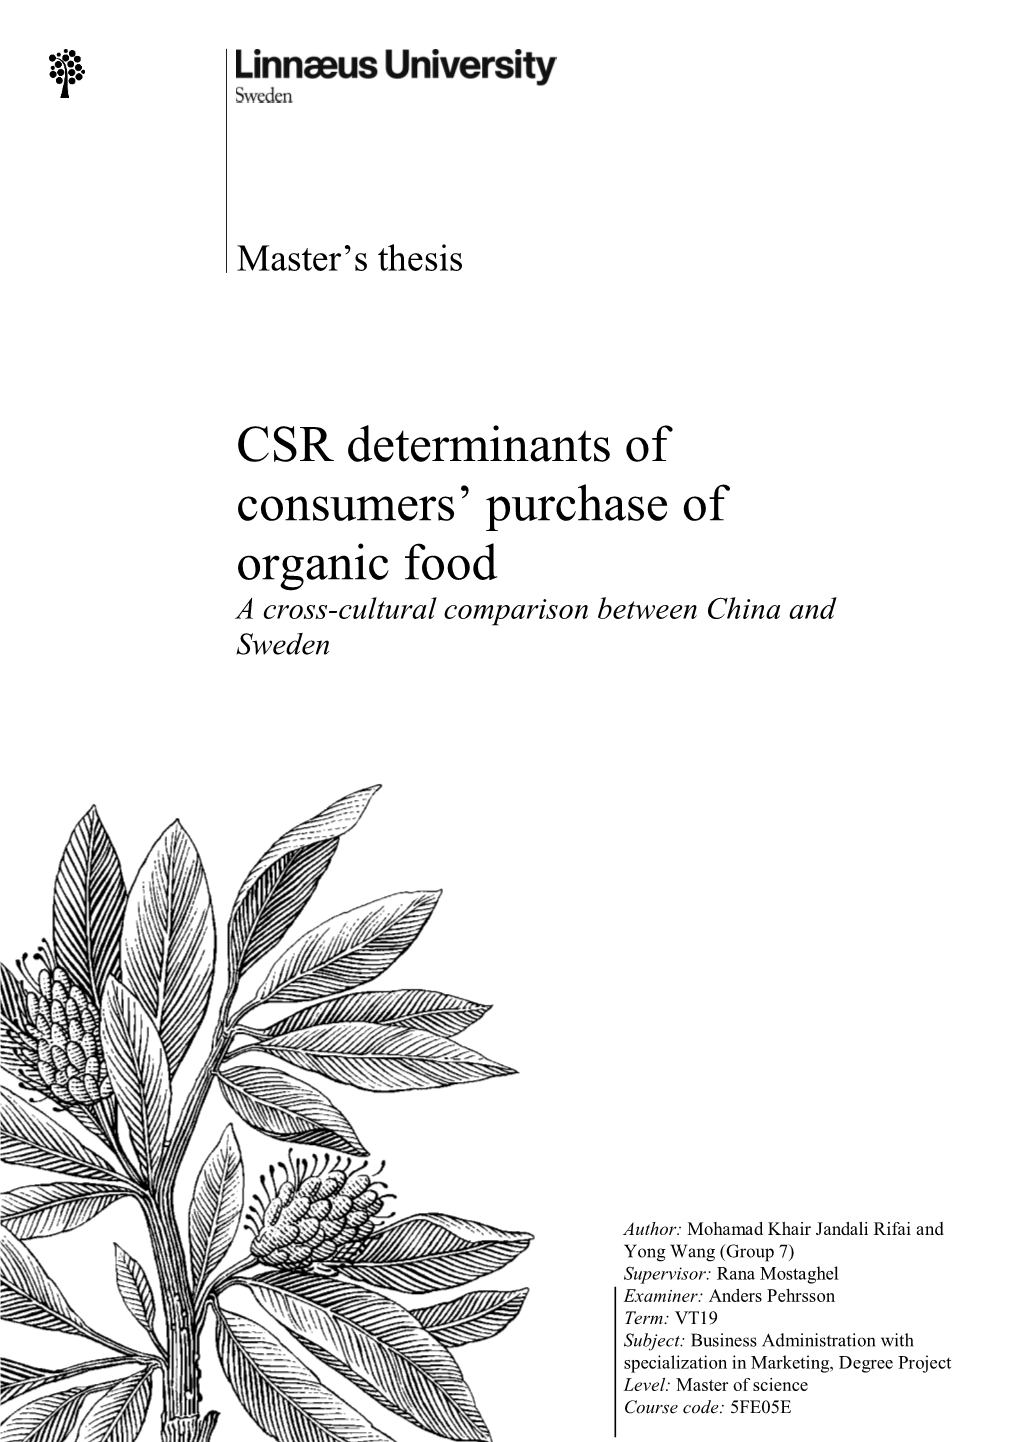 CSR Determinants of Consumers' Purchase of Organic Food